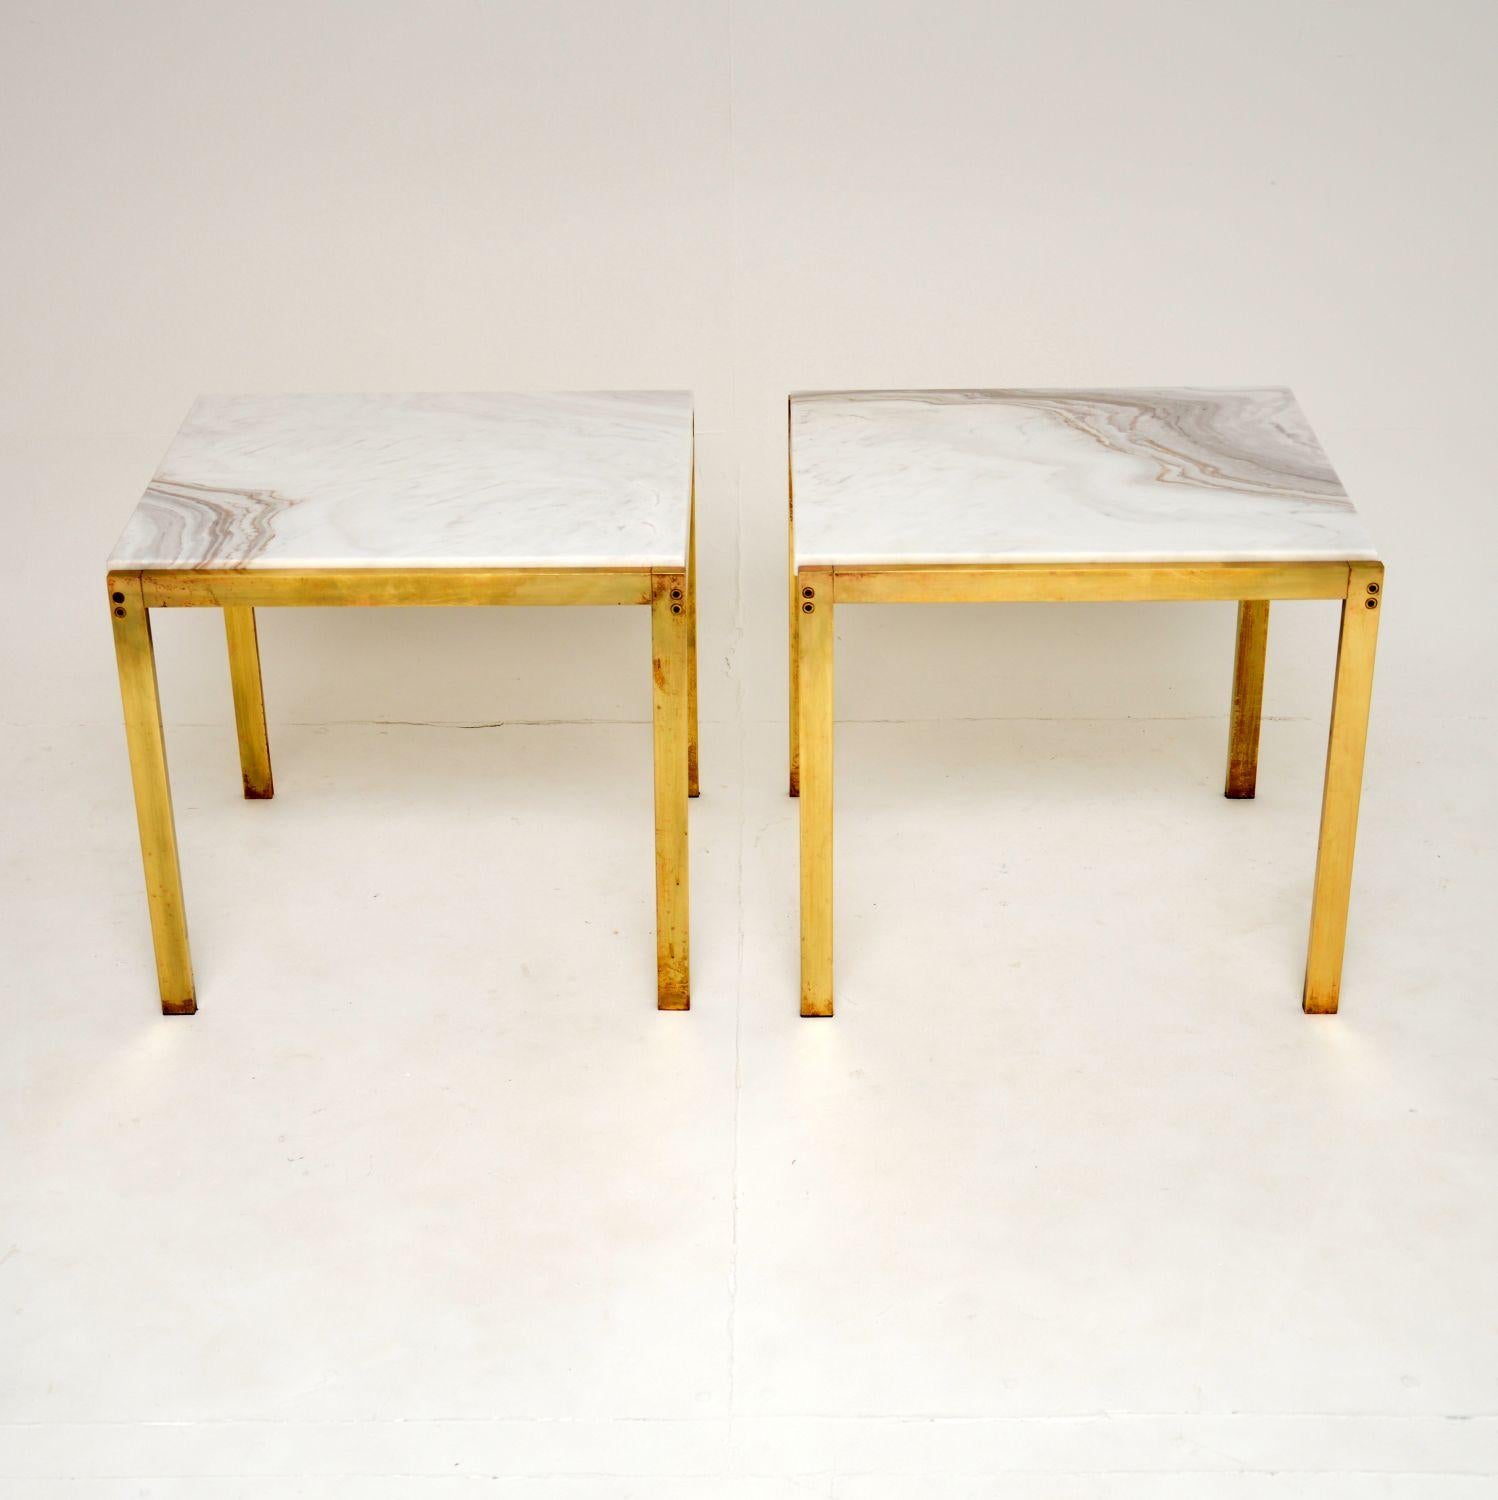 A stylish and beautifully made pair of vintage solid brass side tables with inset marble tops. These were likely made in Italy, they date from the 1970’s.

They are beautifully made, the frames have a lovely and elegant design. They are a great